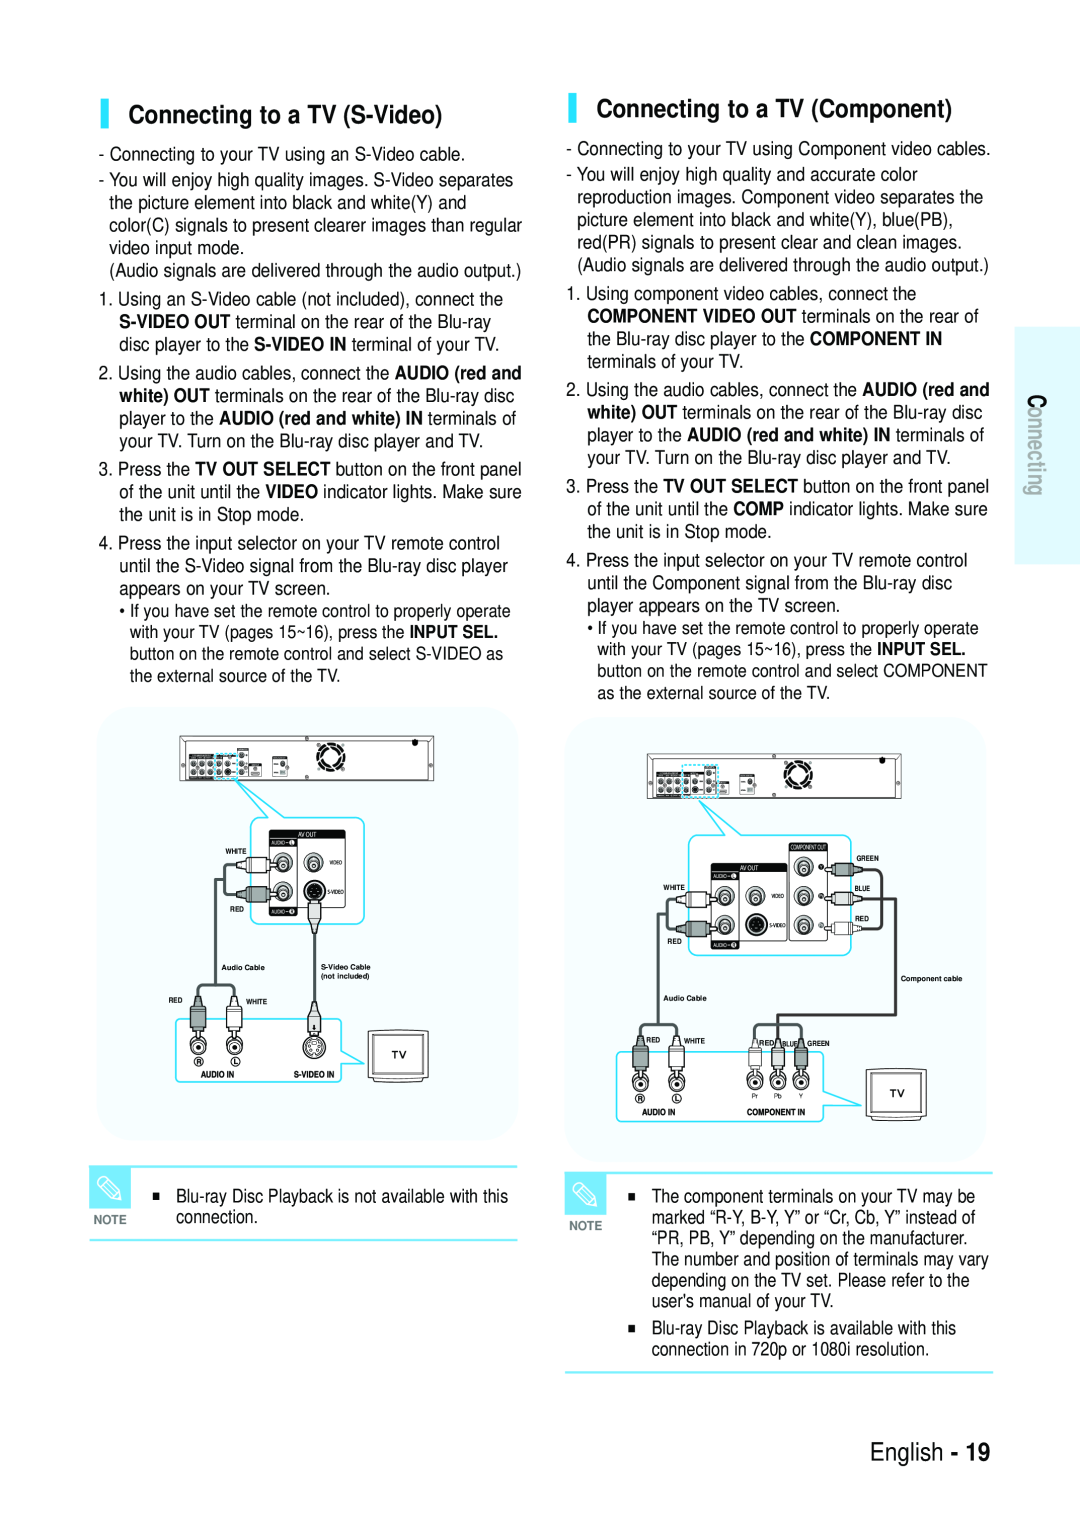 Samsung Blu-ray Disc manual Connecting to a TV S-Video, Connecting to a TV Component, English 